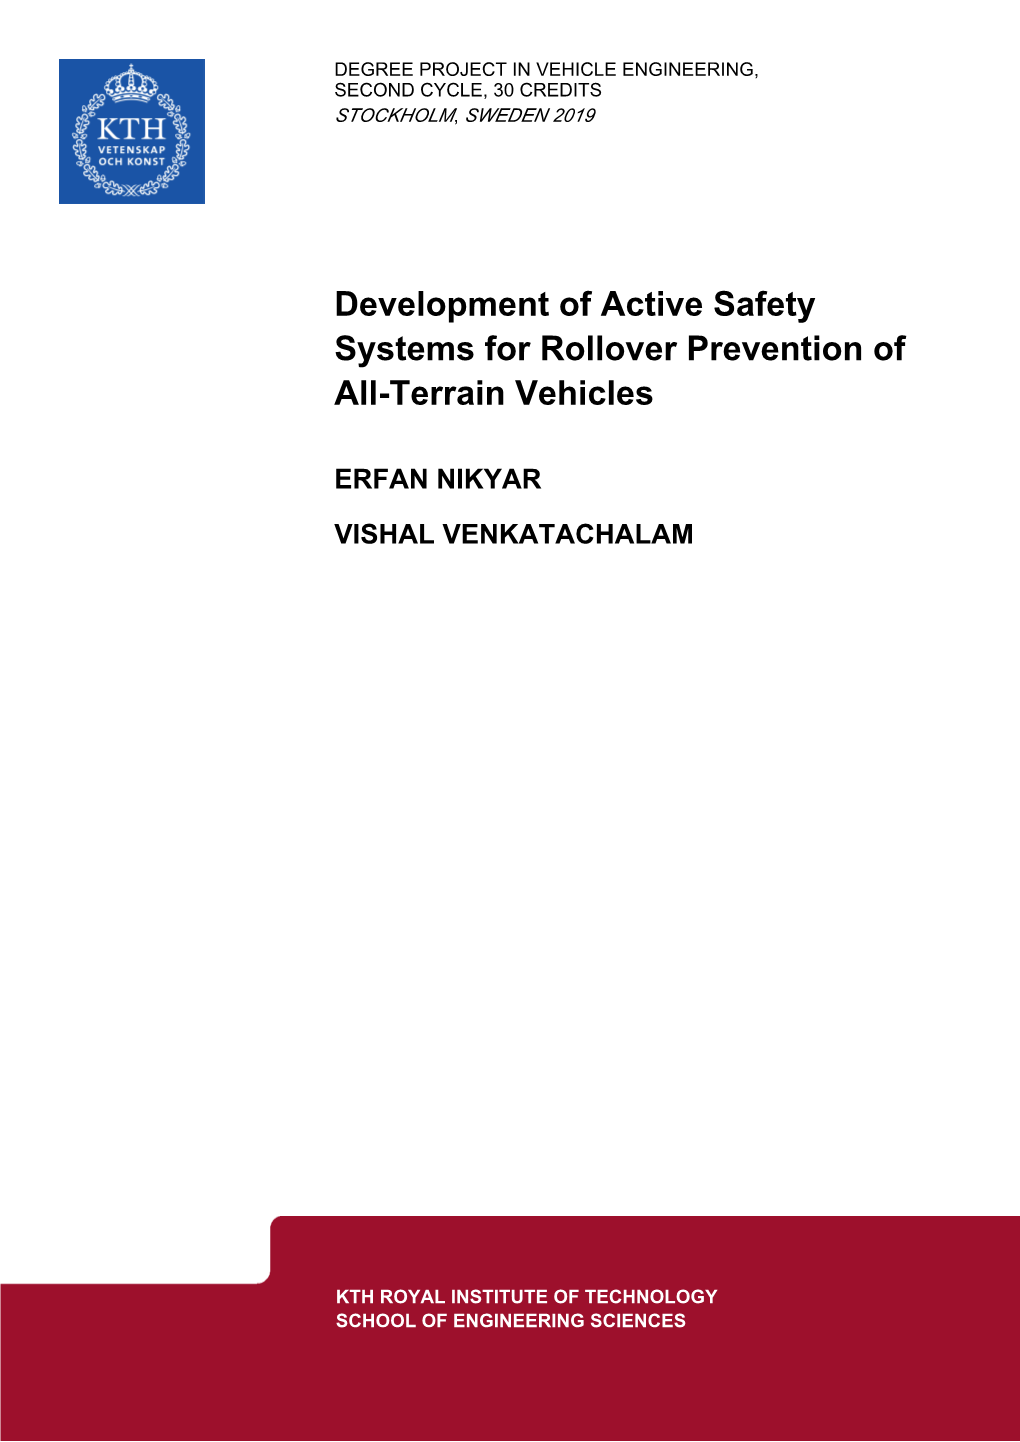 Development of Active Safety Systems for Rollover Prevention of All-Terrain Vehicles